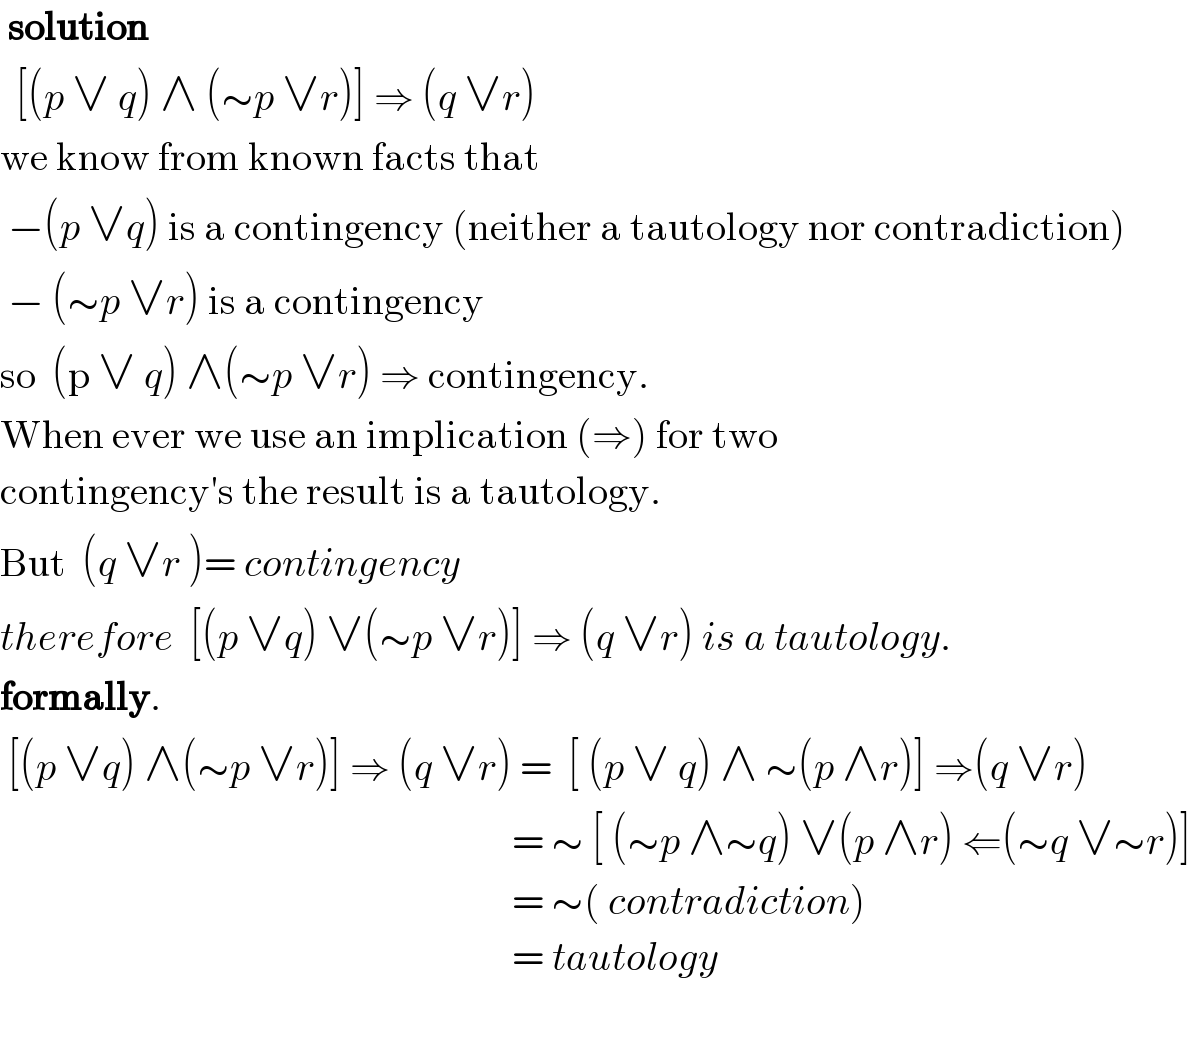  solution    [(p ∨ q) ∧ (∼p ∨r)] ⇒ (q ∨r)  we know from known facts that    −(p ∨q) is a contingency (neither a tautology nor contradiction)   − (∼p ∨r) is a contingency  so  (p ∨ q) ∧(∼p ∨r) ⇒ contingency.  When ever we use an implication (⇒) for two   contingency′s the result is a tautology.  But  (q ∨r )= contingency  therefore  [(p ∨q) ∨(∼p ∨r)] ⇒ (q ∨r) is a tautology.  formally.   [(p ∨q) ∧(∼p ∨r)] ⇒ (q ∨r) =  [ (p ∨ q) ∧ ∼(p ∧r)] ⇒(q ∨r)                                                                  = ∼ [ (∼p ∧∼q) ∨(p ∧r) ⇐(∼q ∨∼r)]                                                                  = ∼( contradiction)                                                                  = tautology    